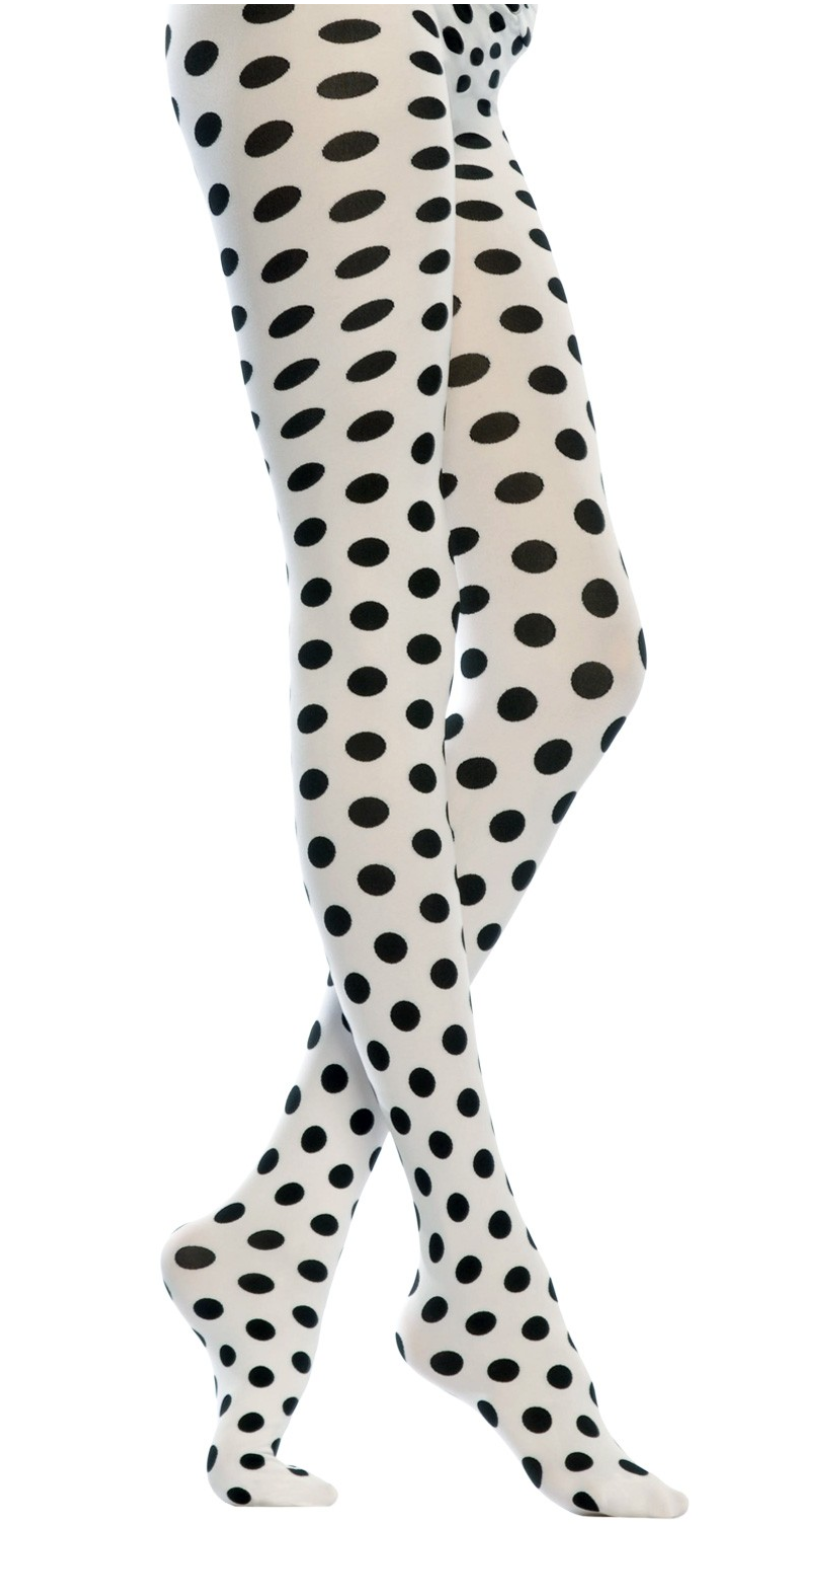 Emilio Cavallini Two Toned Medium Dots Tights - white opaque tights with black polka dots